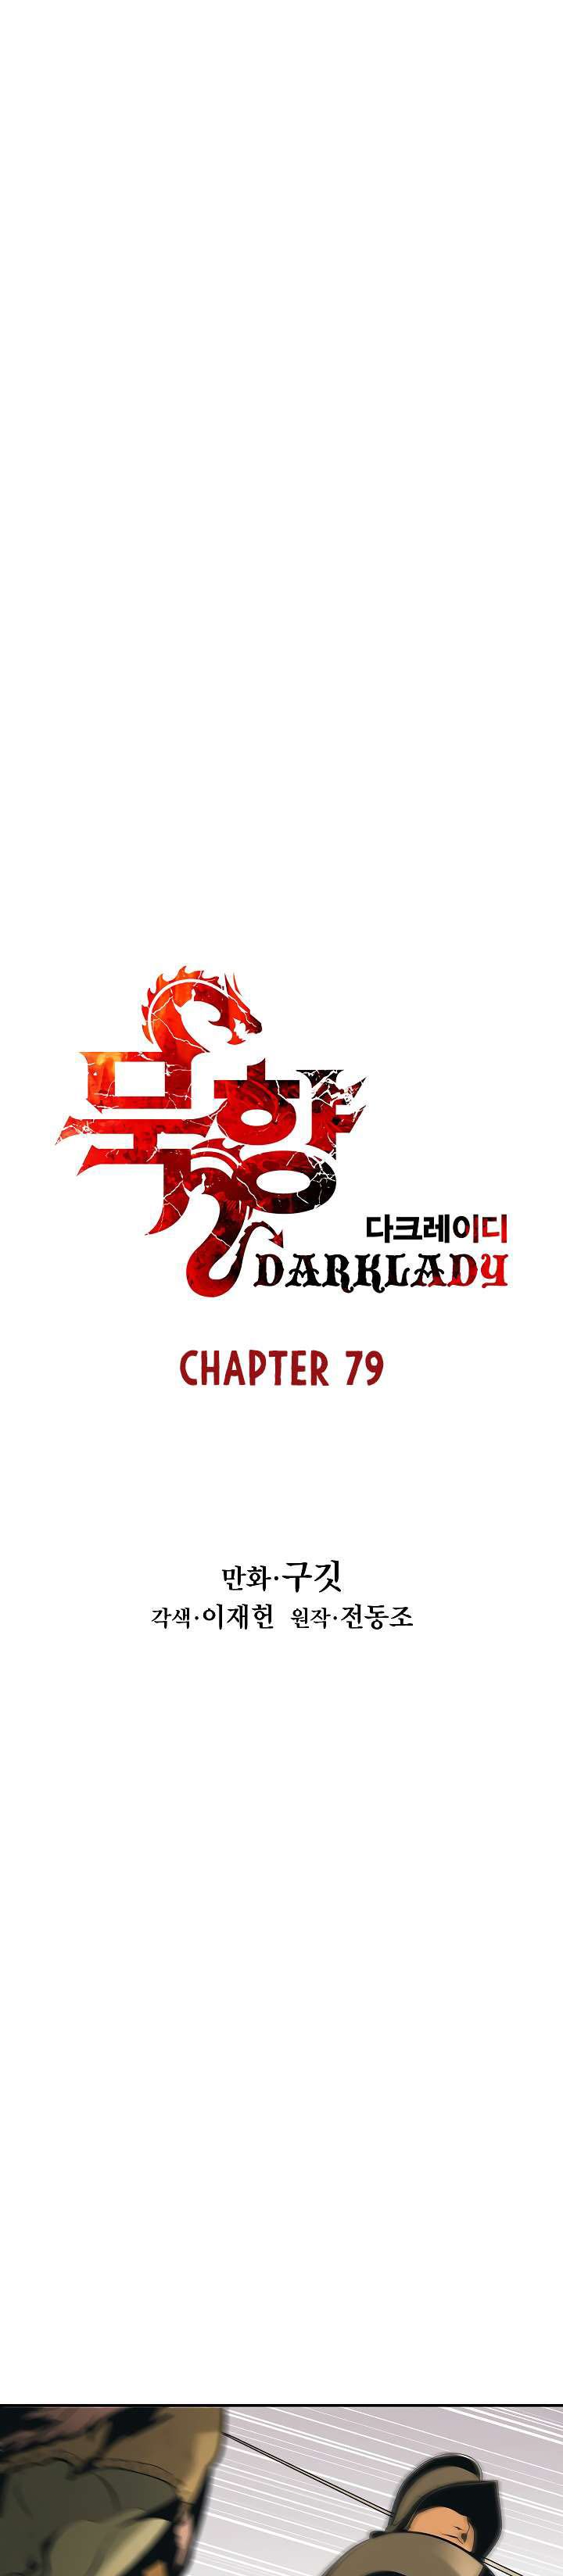 Mookhyang Dark Lady Chapter 79